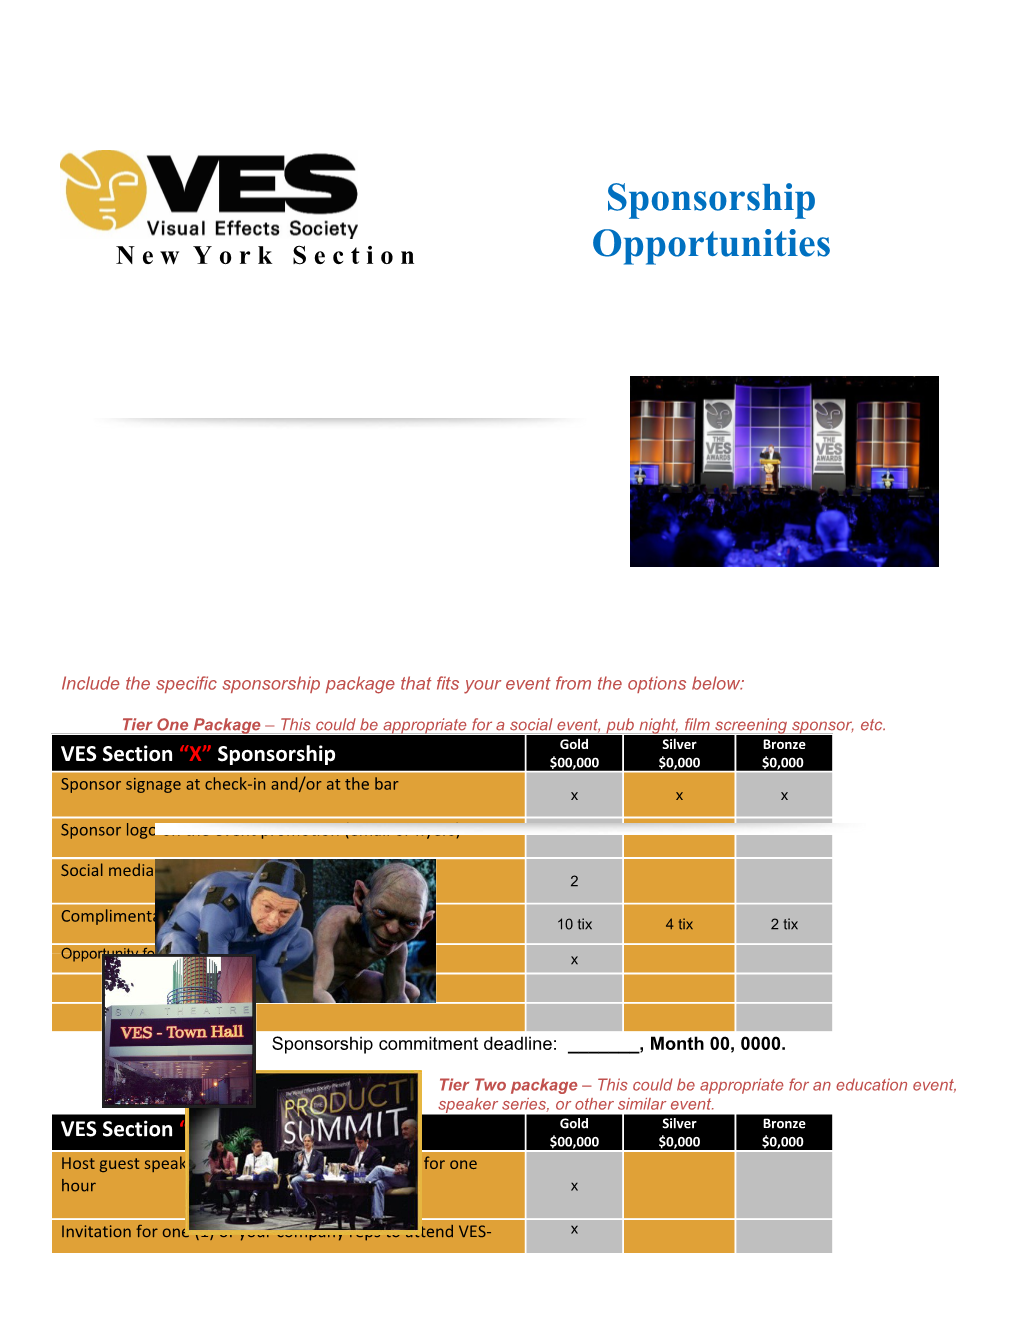 Include the Specific Sponsorship Package That Fits Your Event from the Options Below